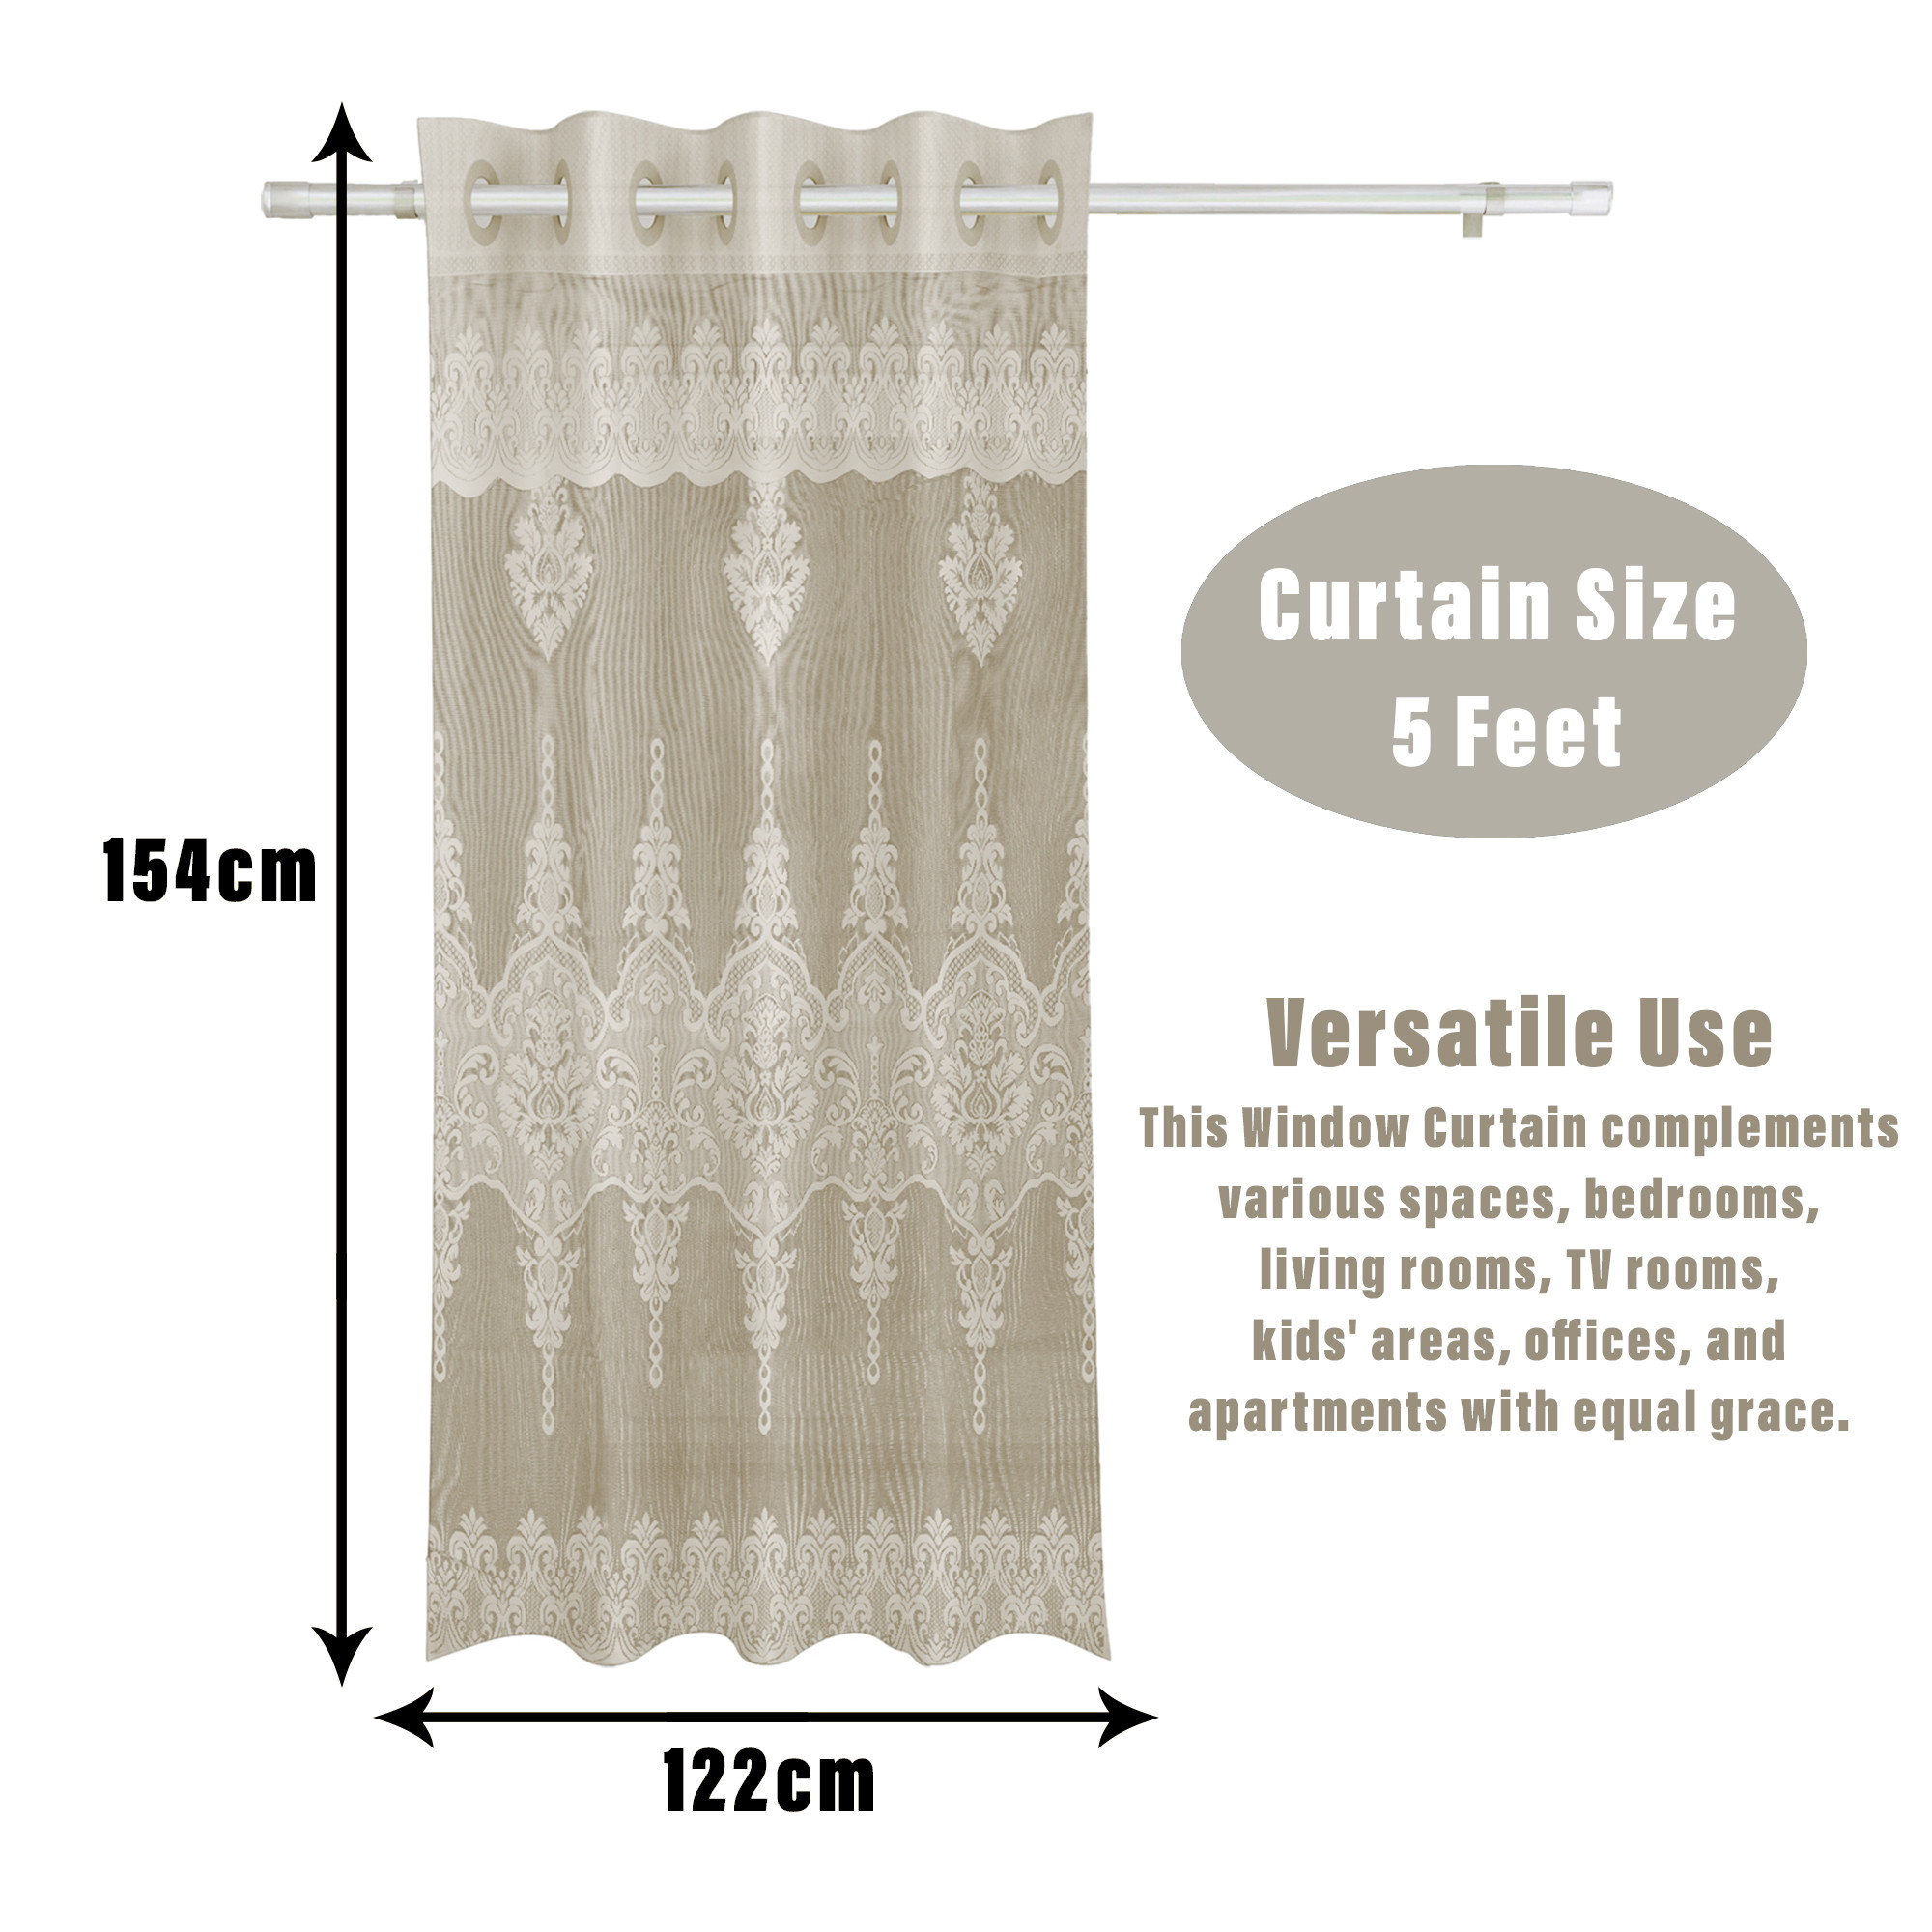 Kuber Industries Window Curtain | Darkening Window Curtains | Sheer Curtain with 8 Rings | Parda for Living Room | Drapes for Bedroom | Net Frill Window Curtain | 5 Ft | SY15ZZ | Cream